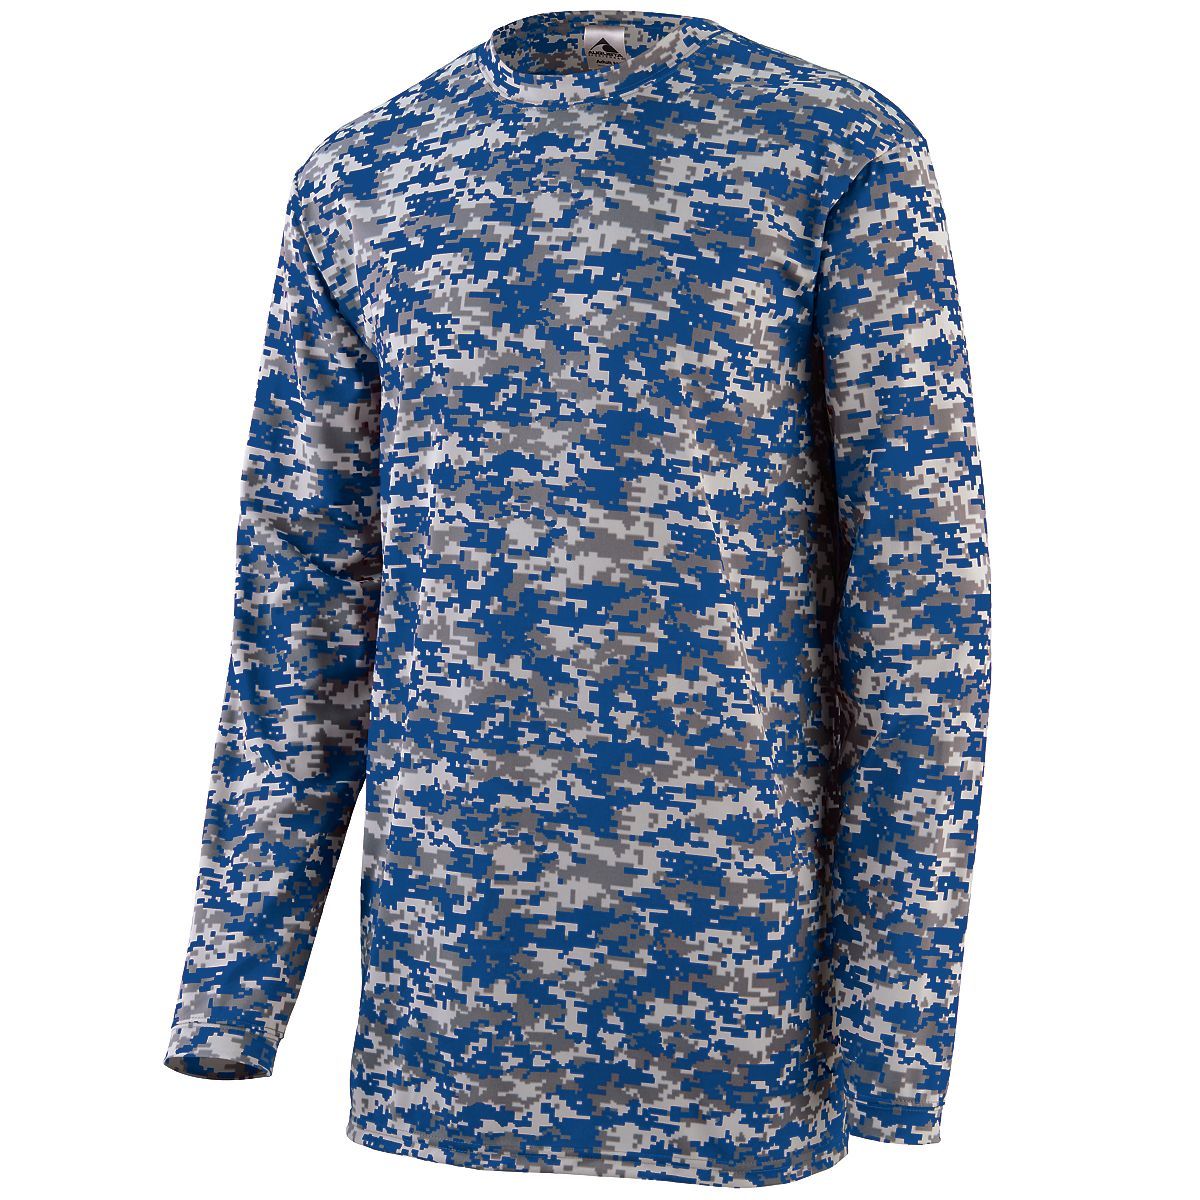 Augusta Sportswear Youth Digi Camo Wicking Long Sleeve T-Shirt in Royal Digi  -Part of the Youth, Youth-Tee-Shirt, T-Shirts, Augusta-Products, Shirts product lines at KanaleyCreations.com